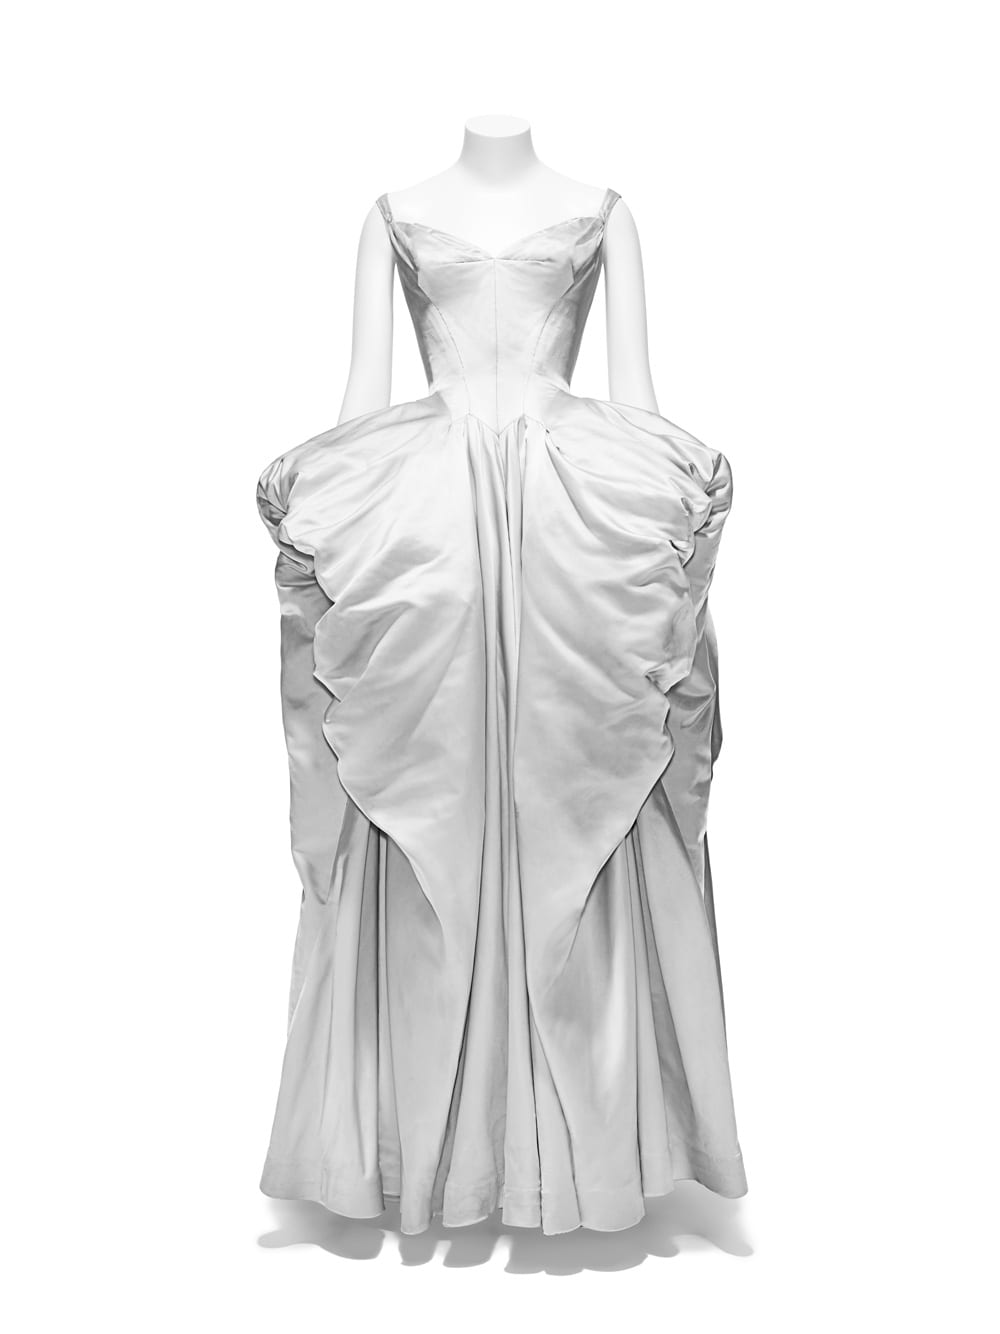 Interruption Ball Gown, Charles James (American, born Great Britain, 1906– 1978), 1951; Brooklyn Museum Costume Collection at The Metropolitan Museum of Art, Gift of the Brooklyn Museum, 2009; Gift of Mr. and Mrs. Robert Coulson, 1964 (2009.300.1311). Image courtesy of The Metropolitan Museum of Art, Photo © Nicholas Alan Cope